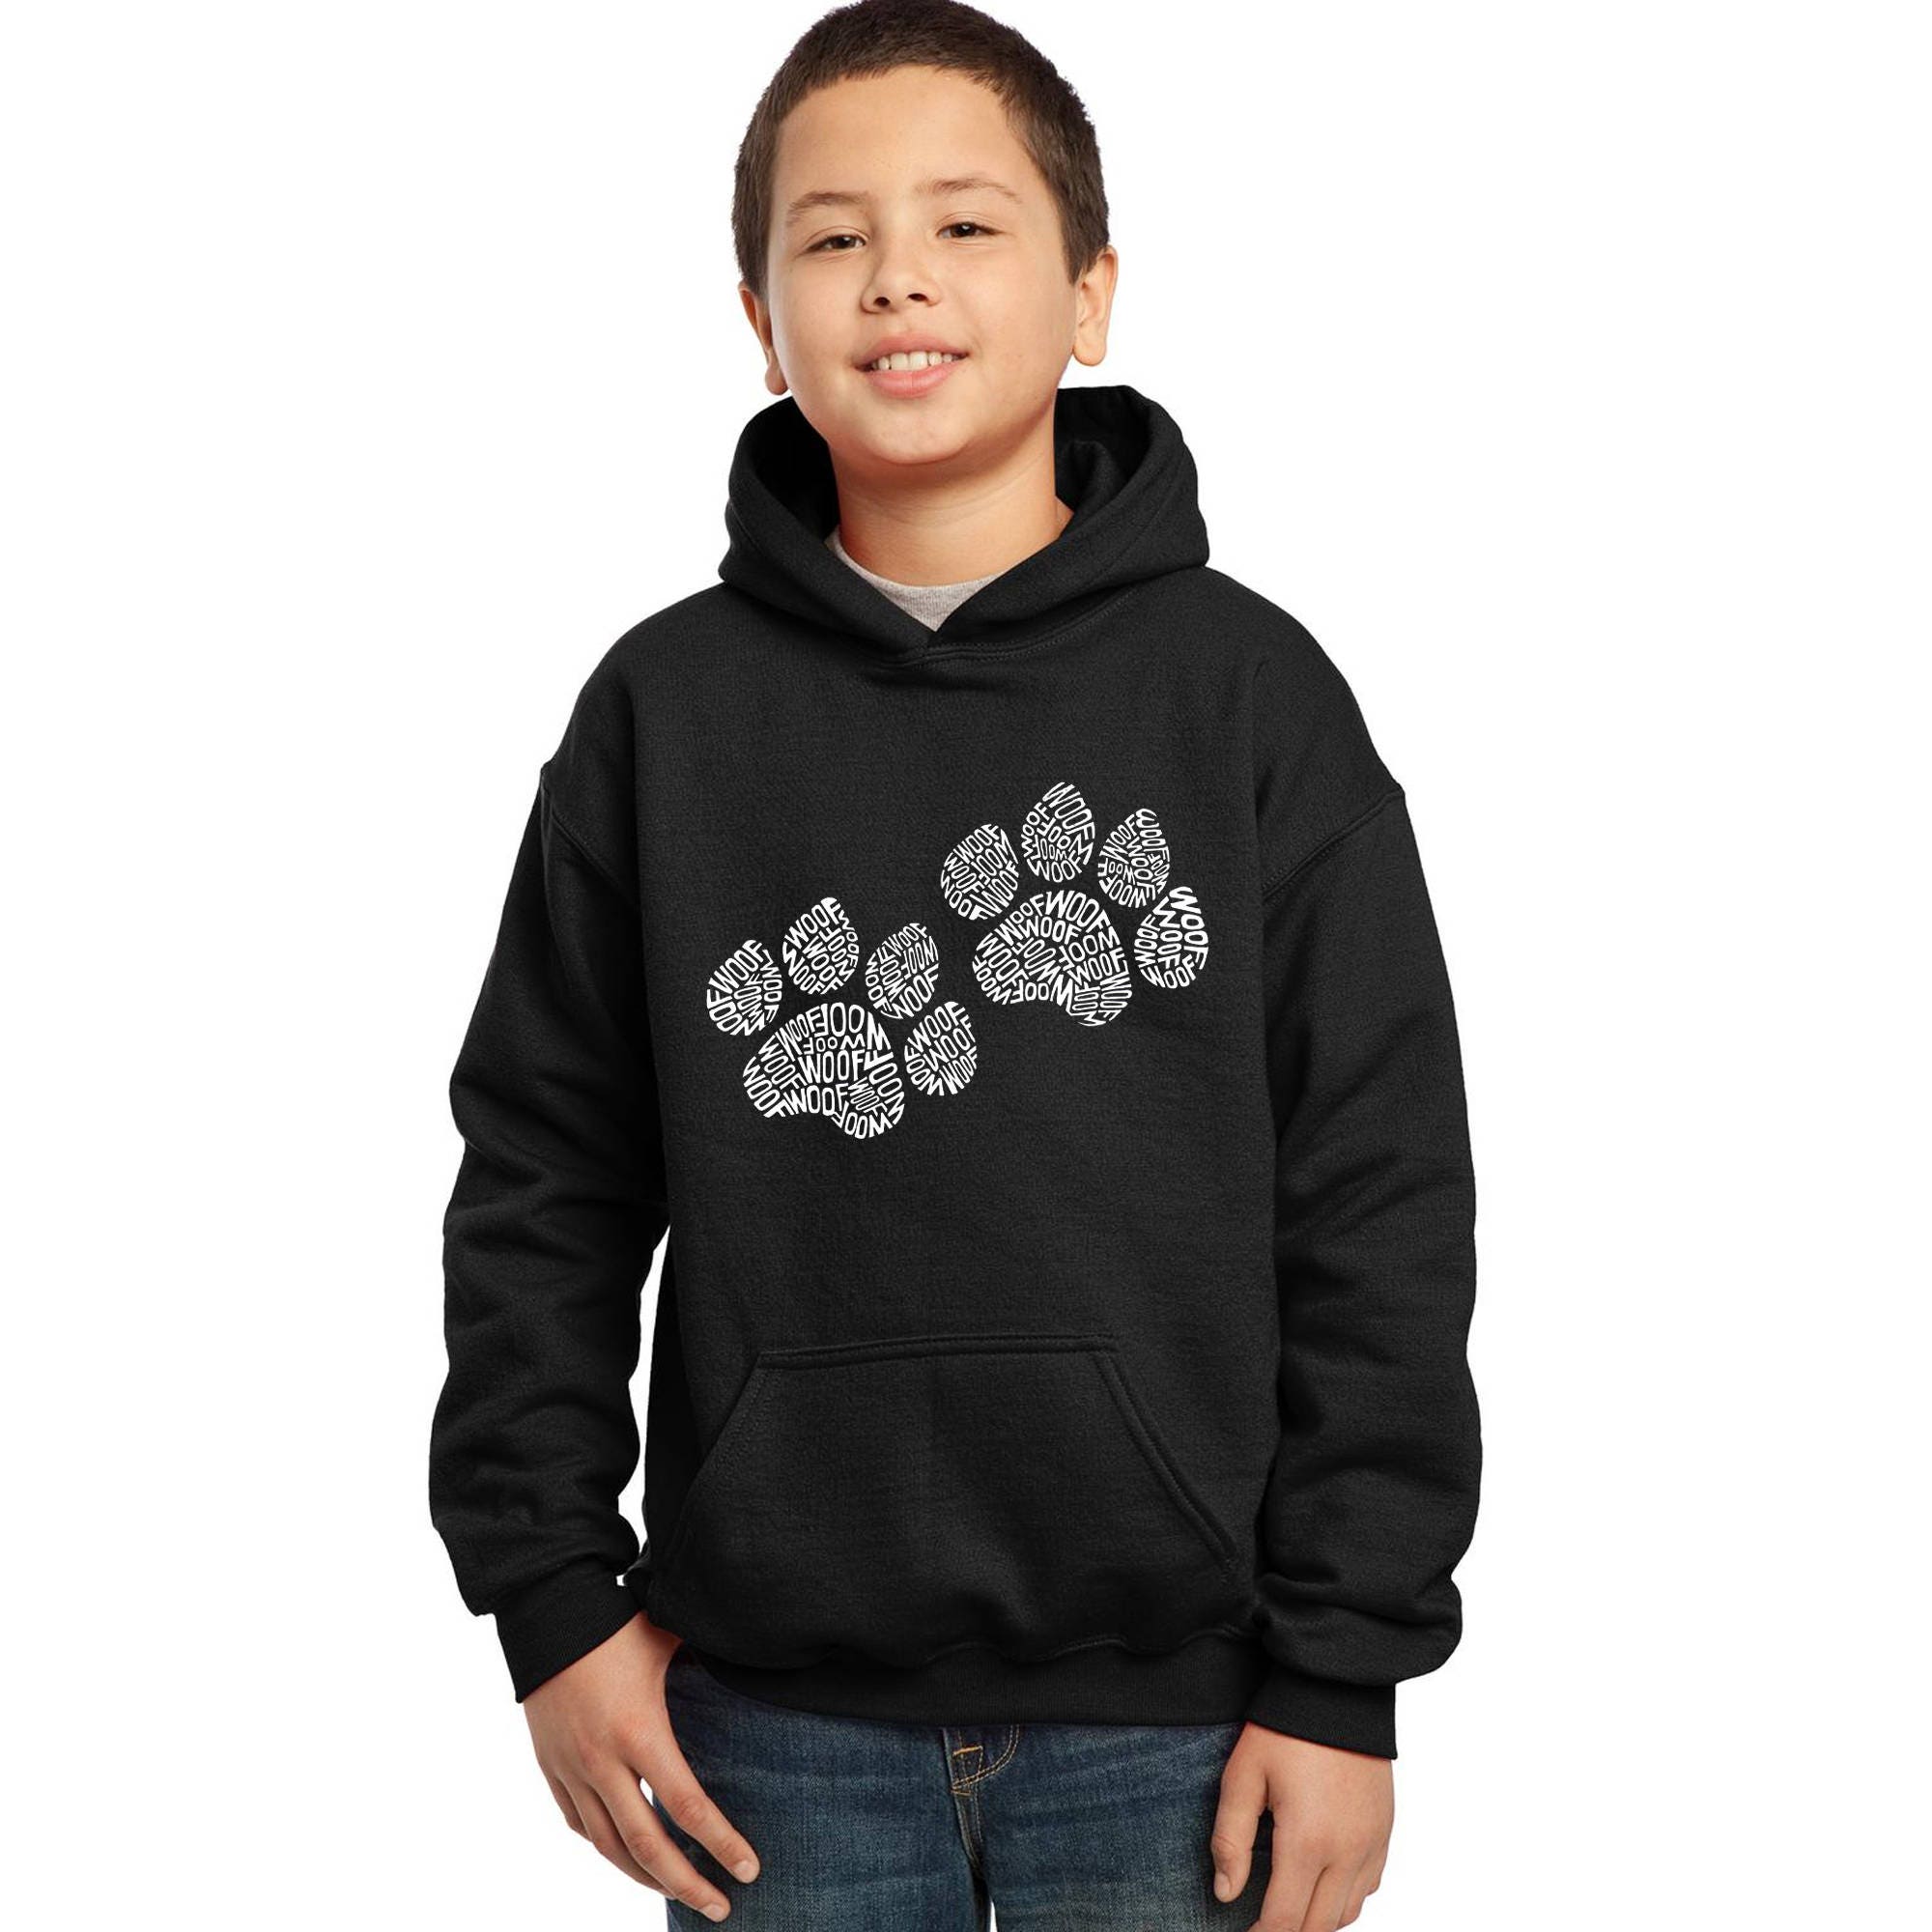 Boy's Hooded Sweatshirt Dog Paw Prints Created Out of - Etsy